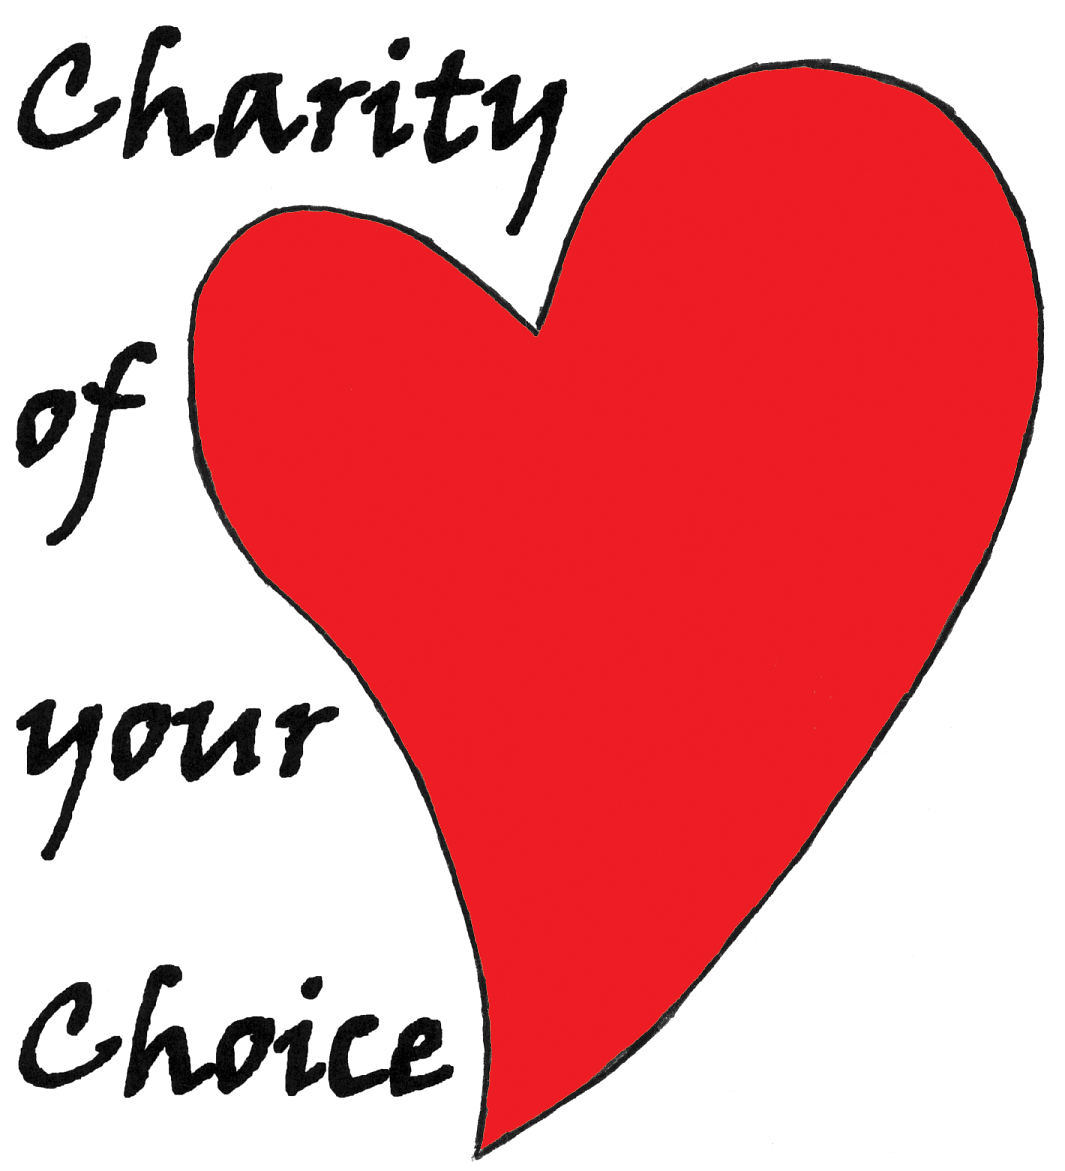 Charity of your Choice logo Colour